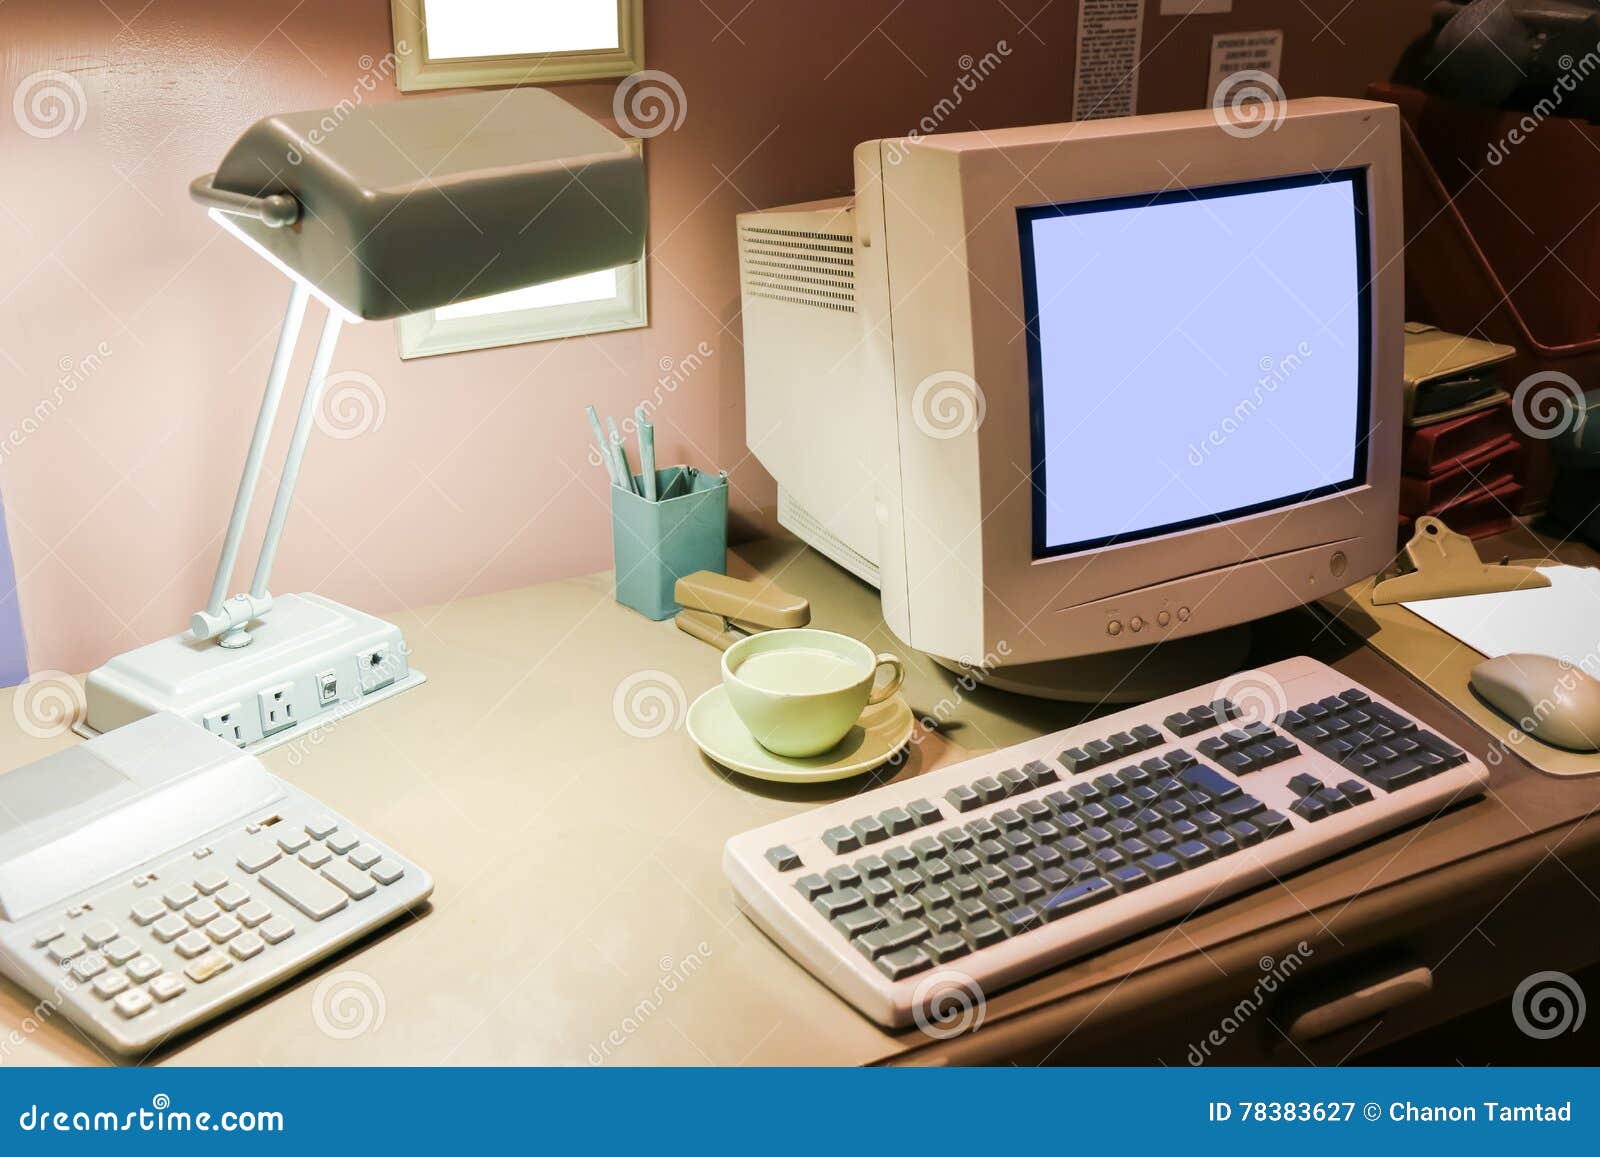 Retro Office Desk in Dark Room with Simulator Object. Stock Image - Image  of office, objects: 78383627